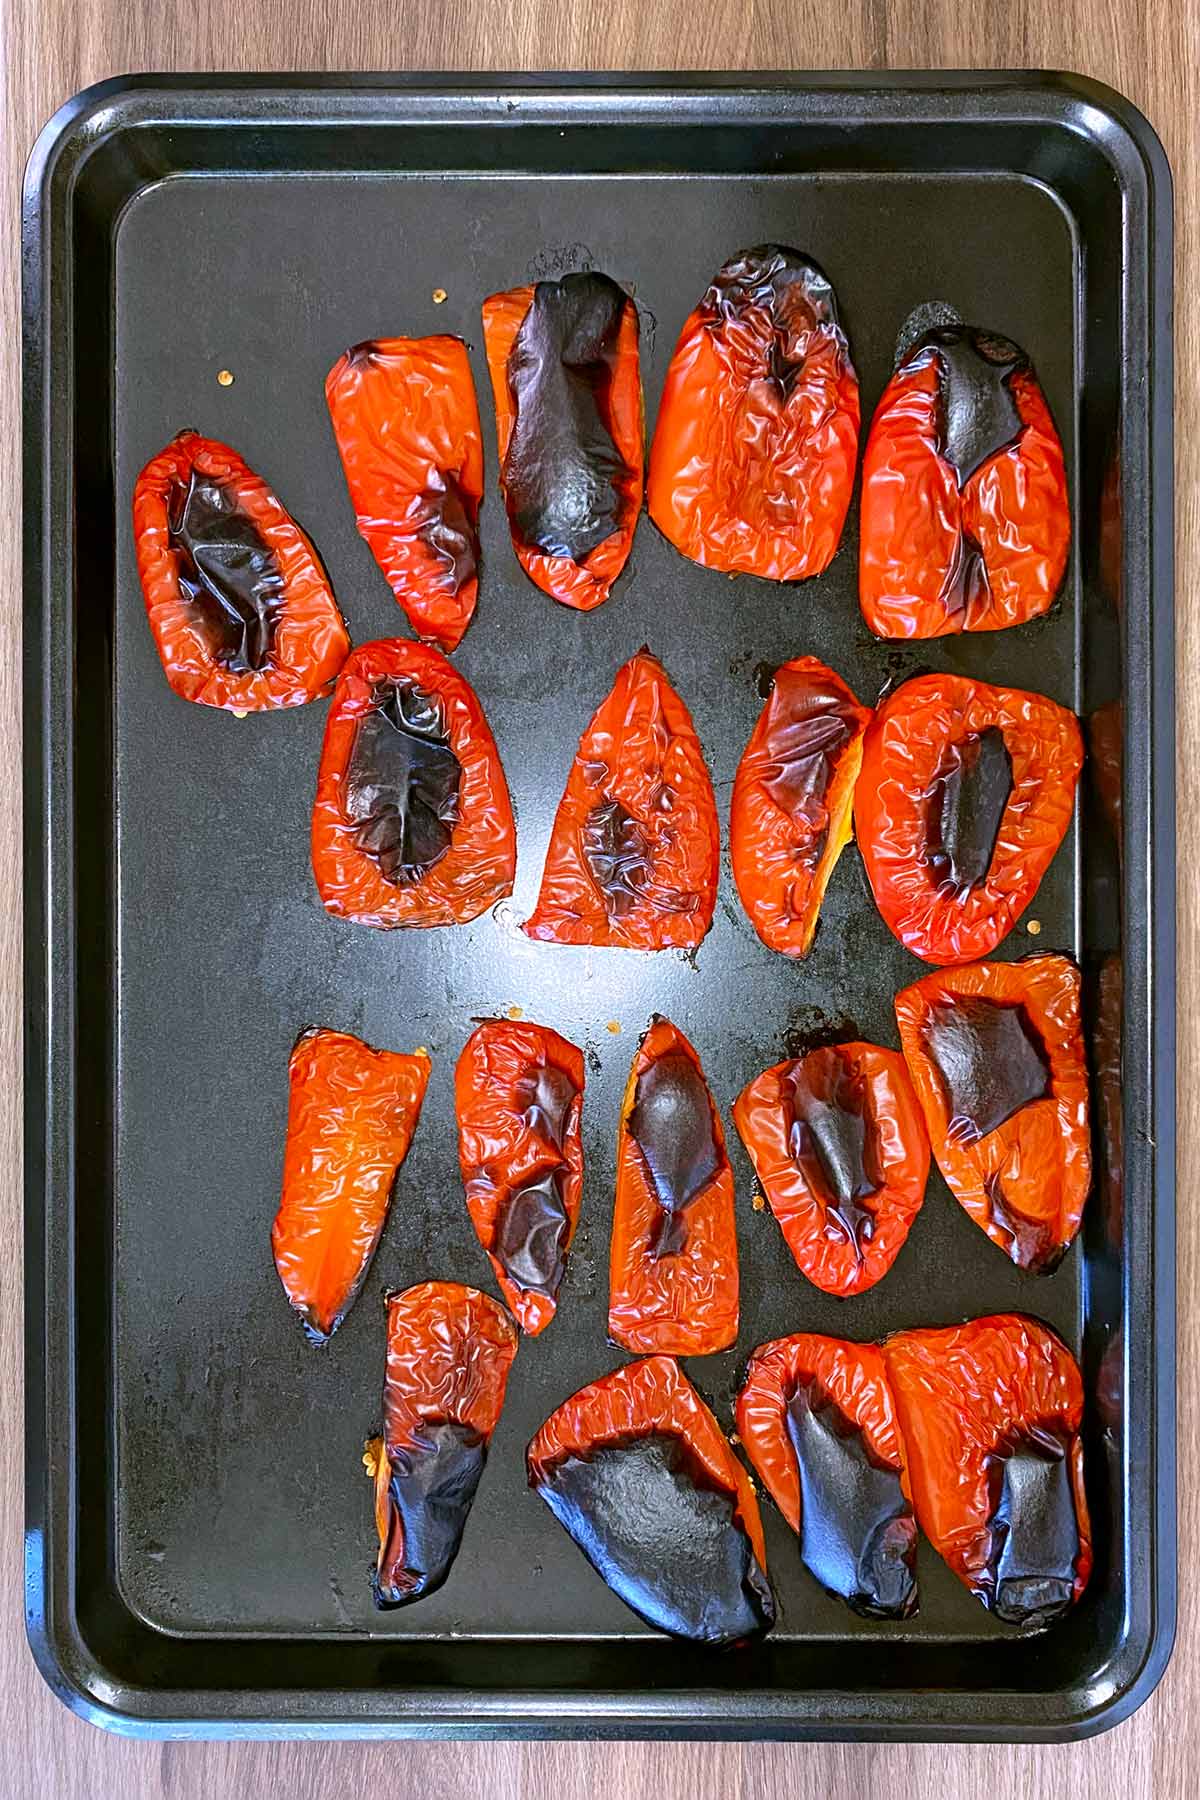 Roasted red peppers on a baking tray.